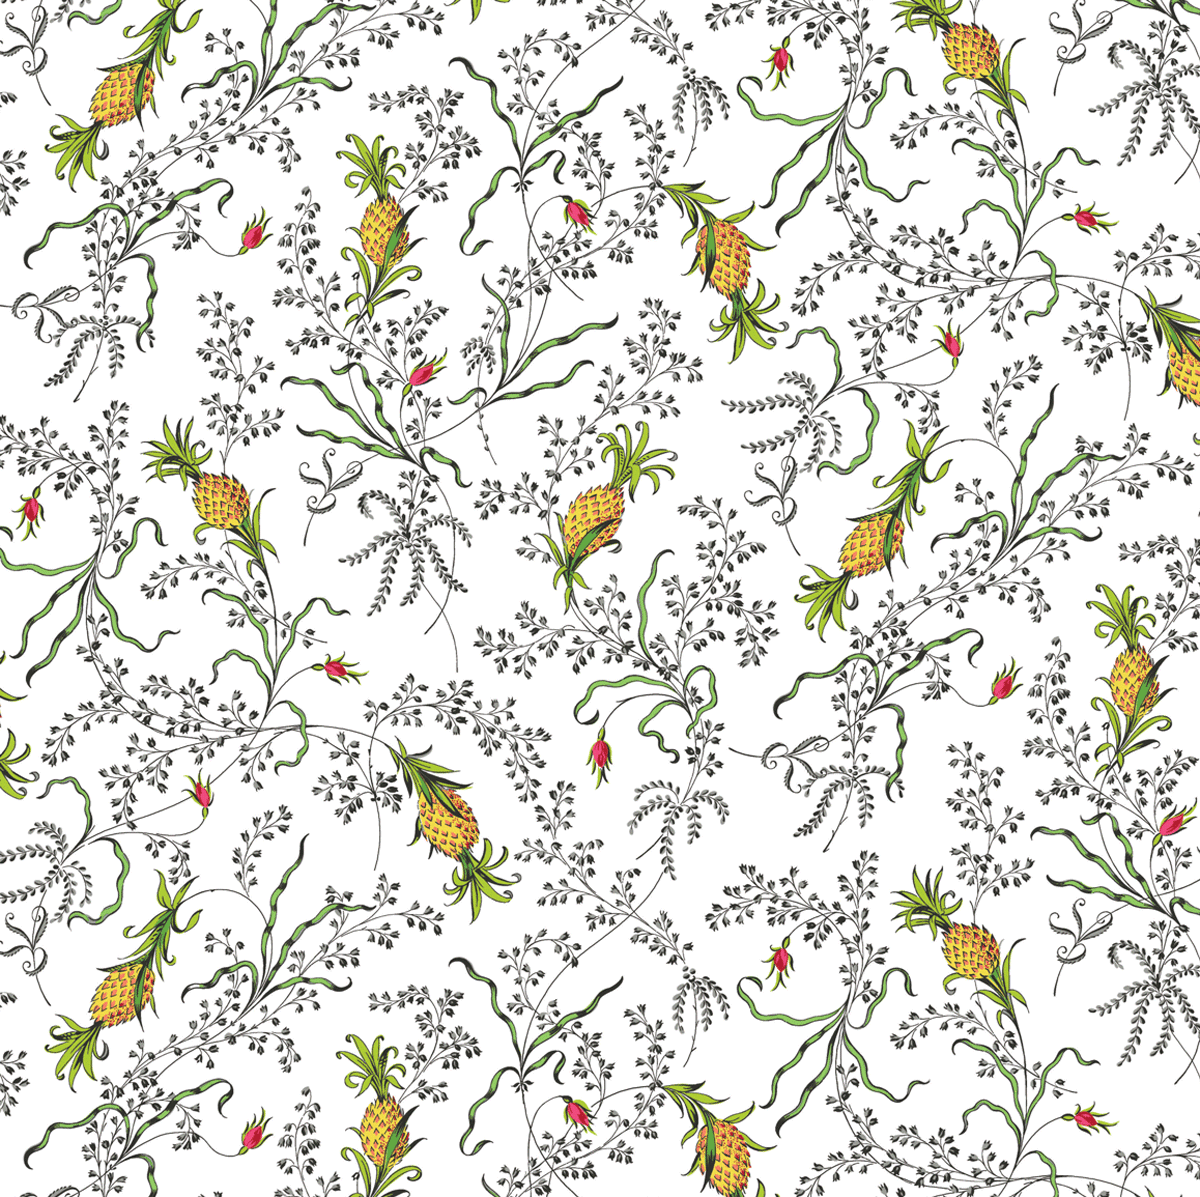 a pattern of flowers and leaves on a white background.